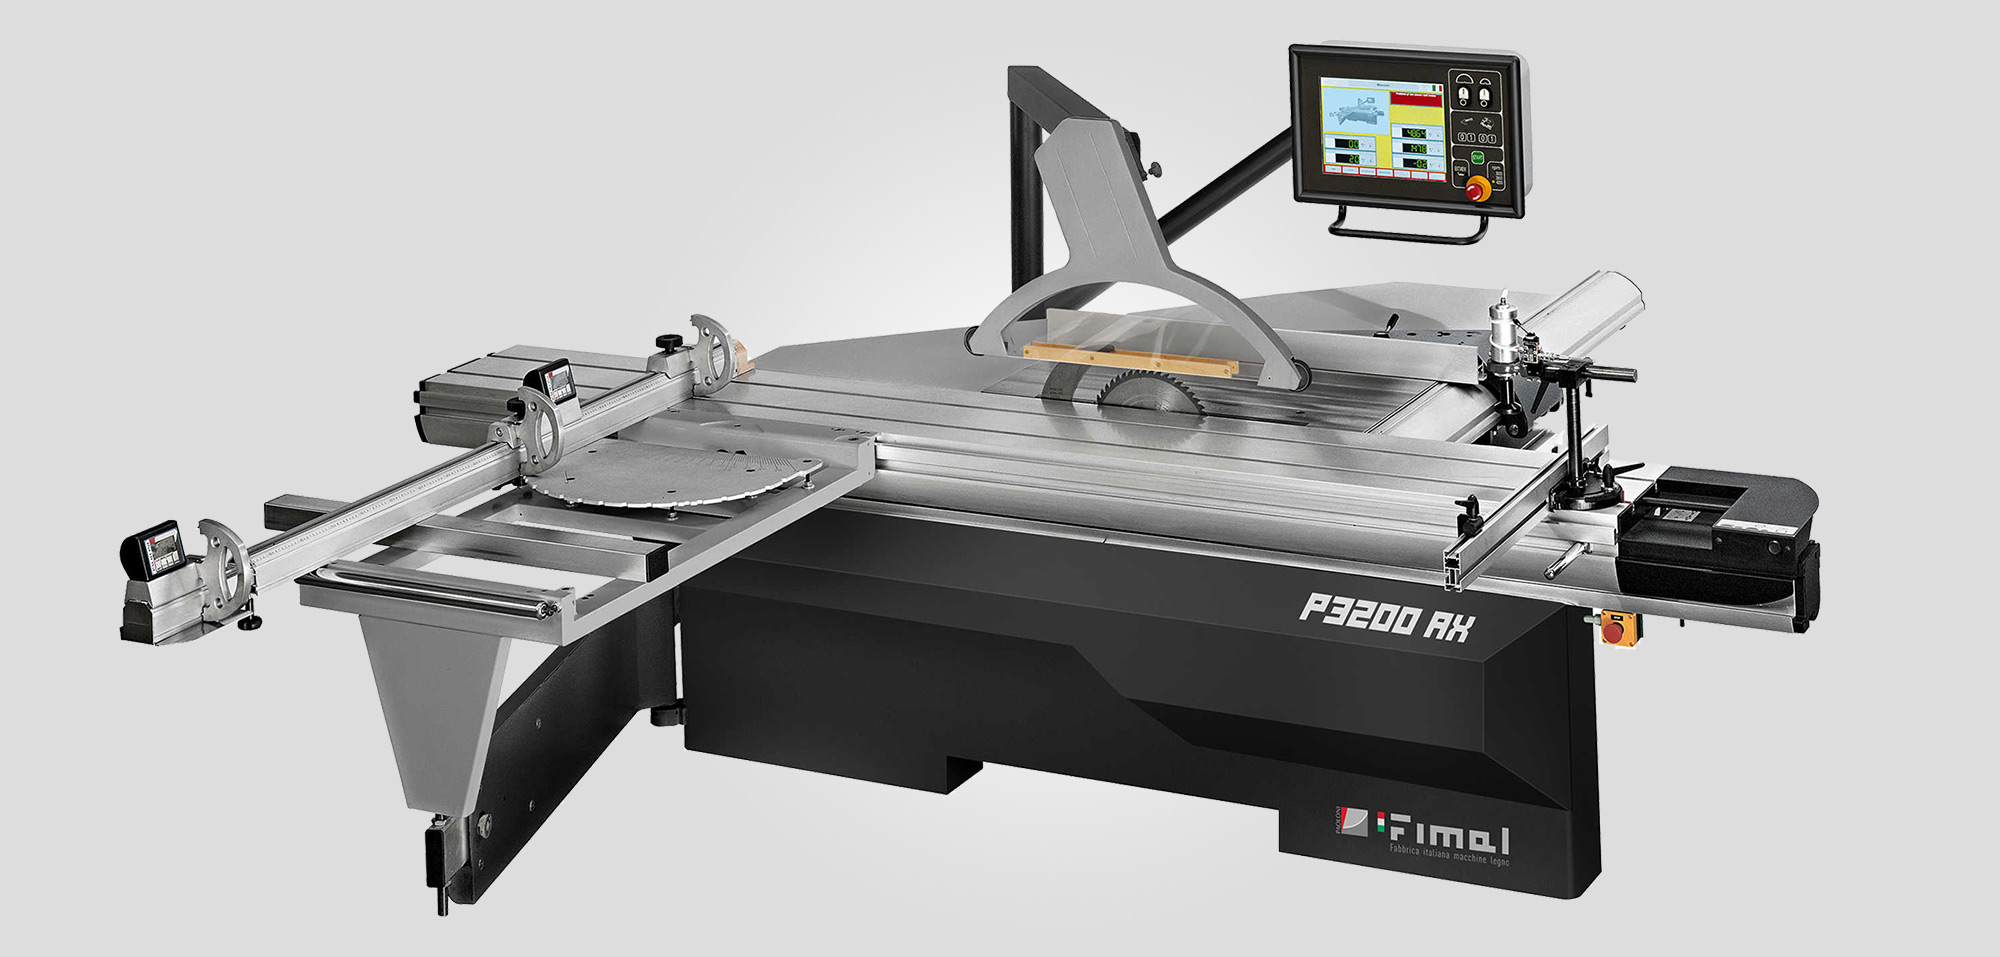 Sliding table saw with undercutter - FIMAL P3200AX-08